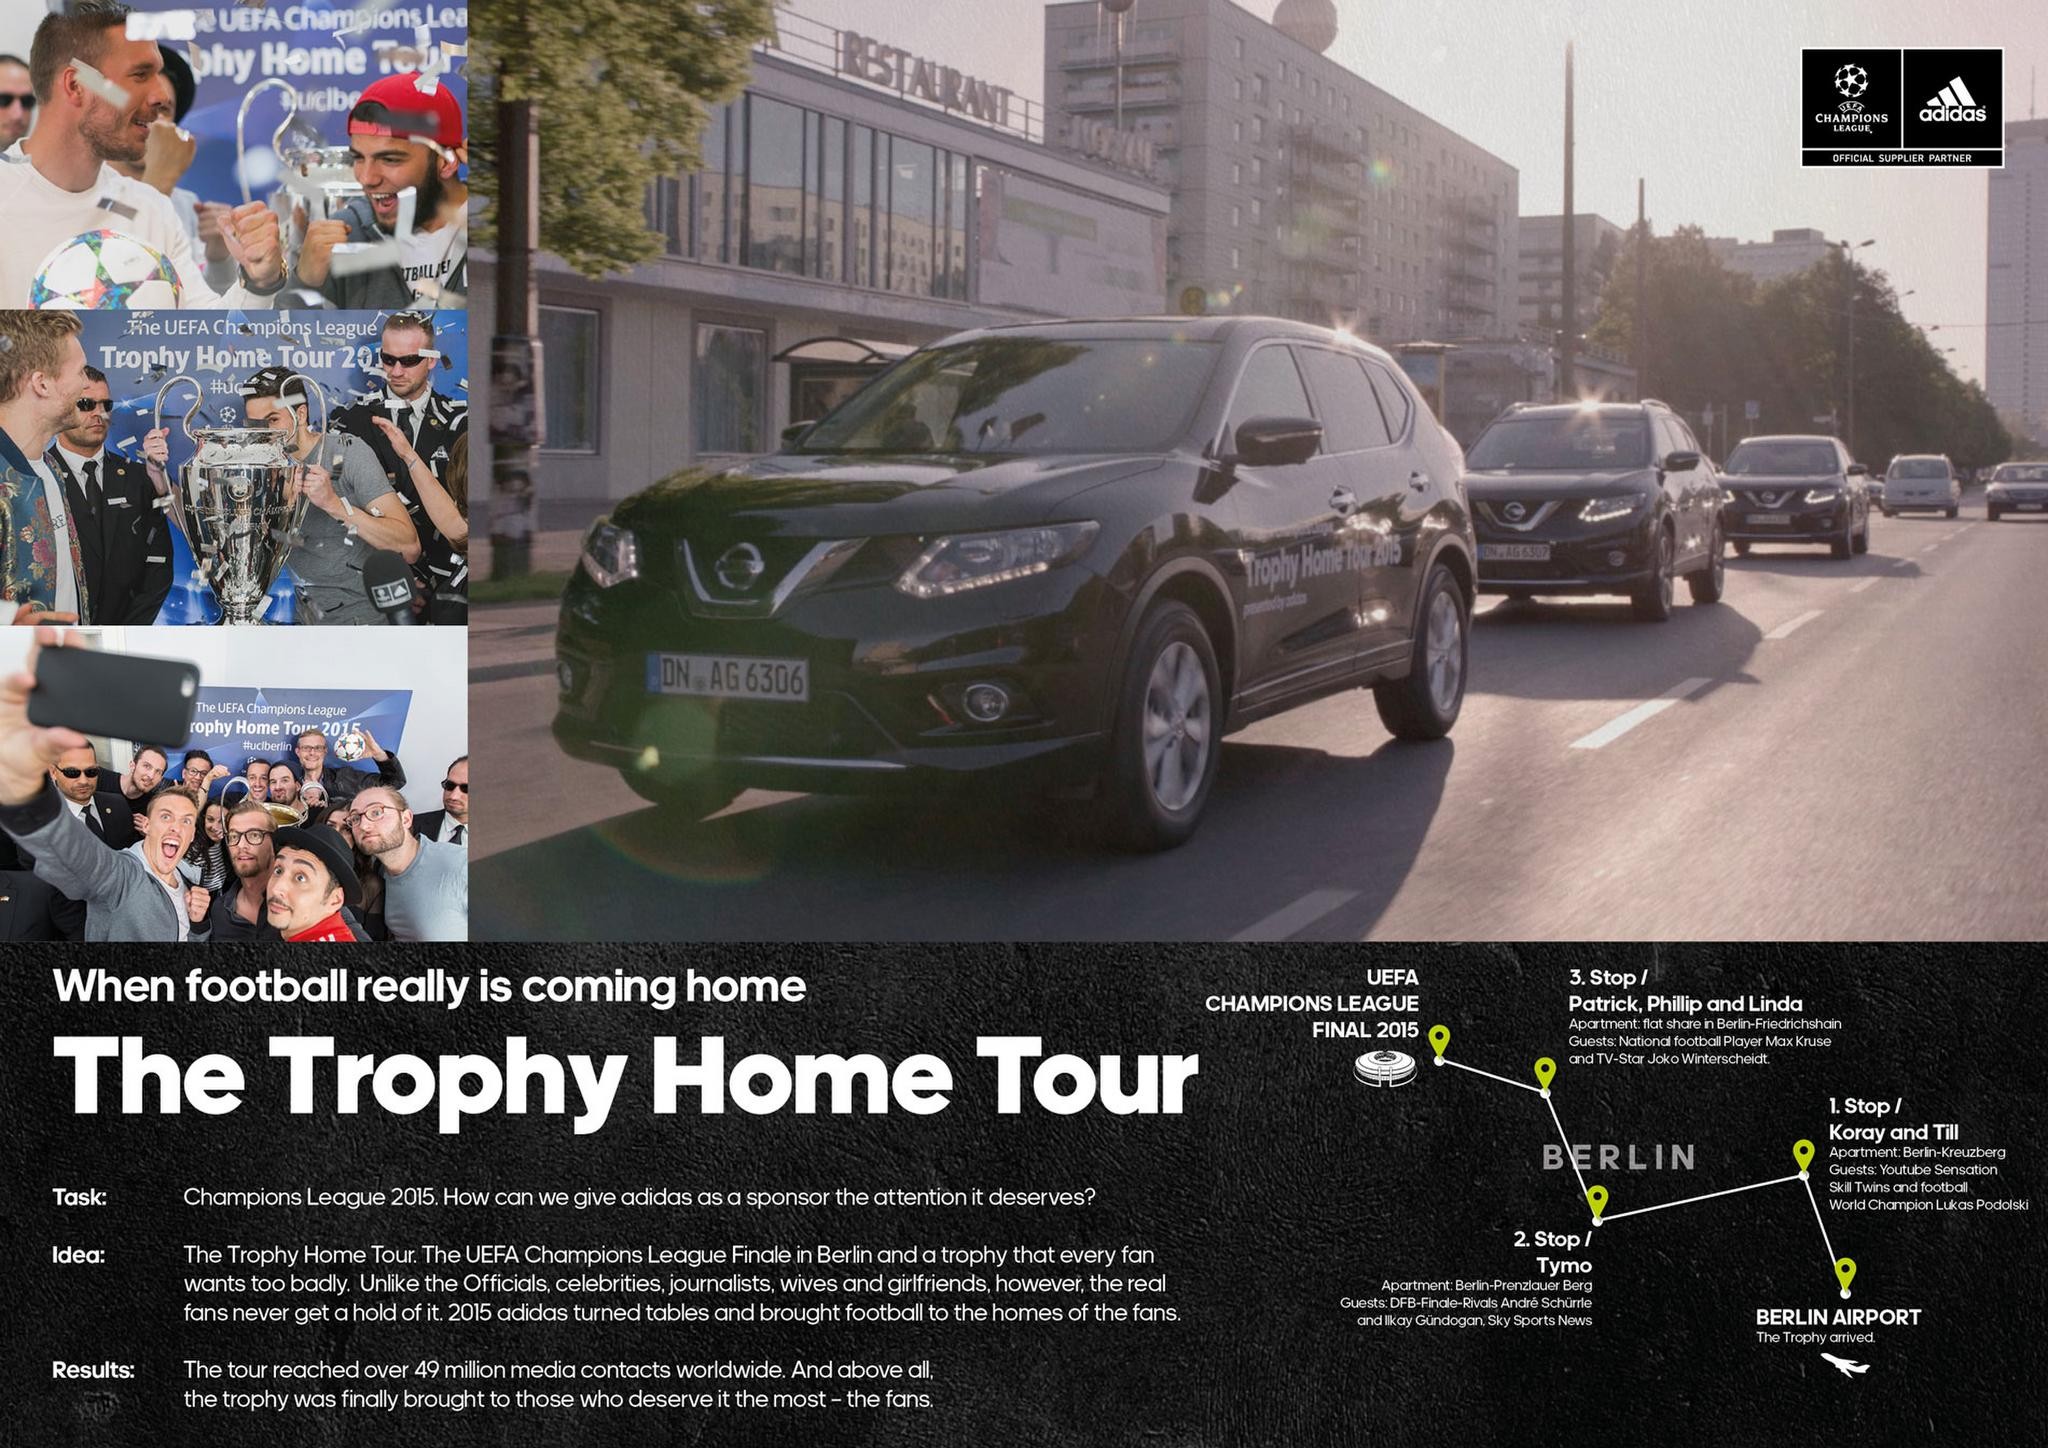 Football is really coming home. The Trophy Home Tour